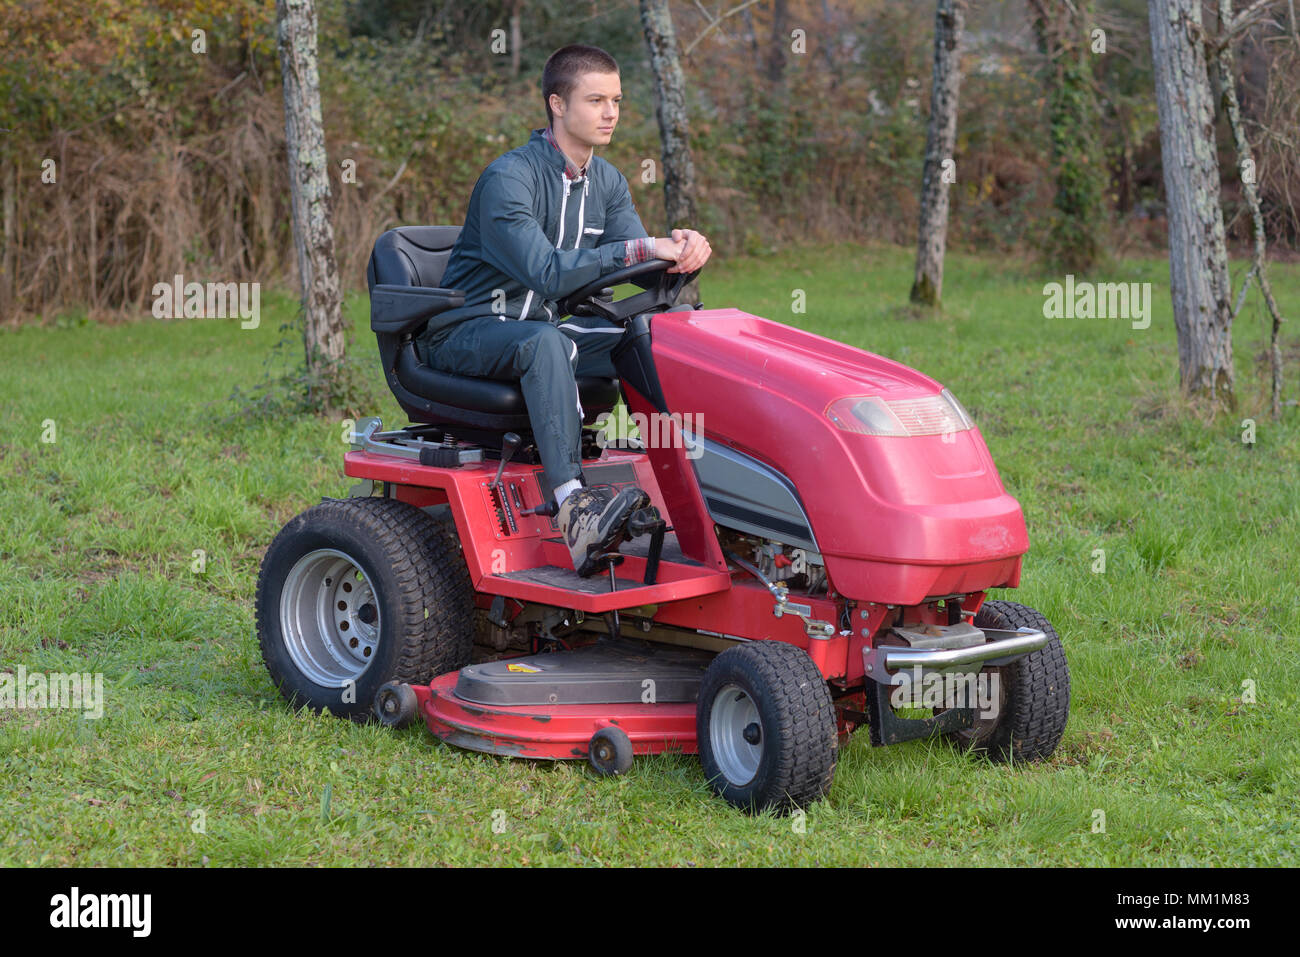 gardener on a garden seated on a lawn mower Stock Photo